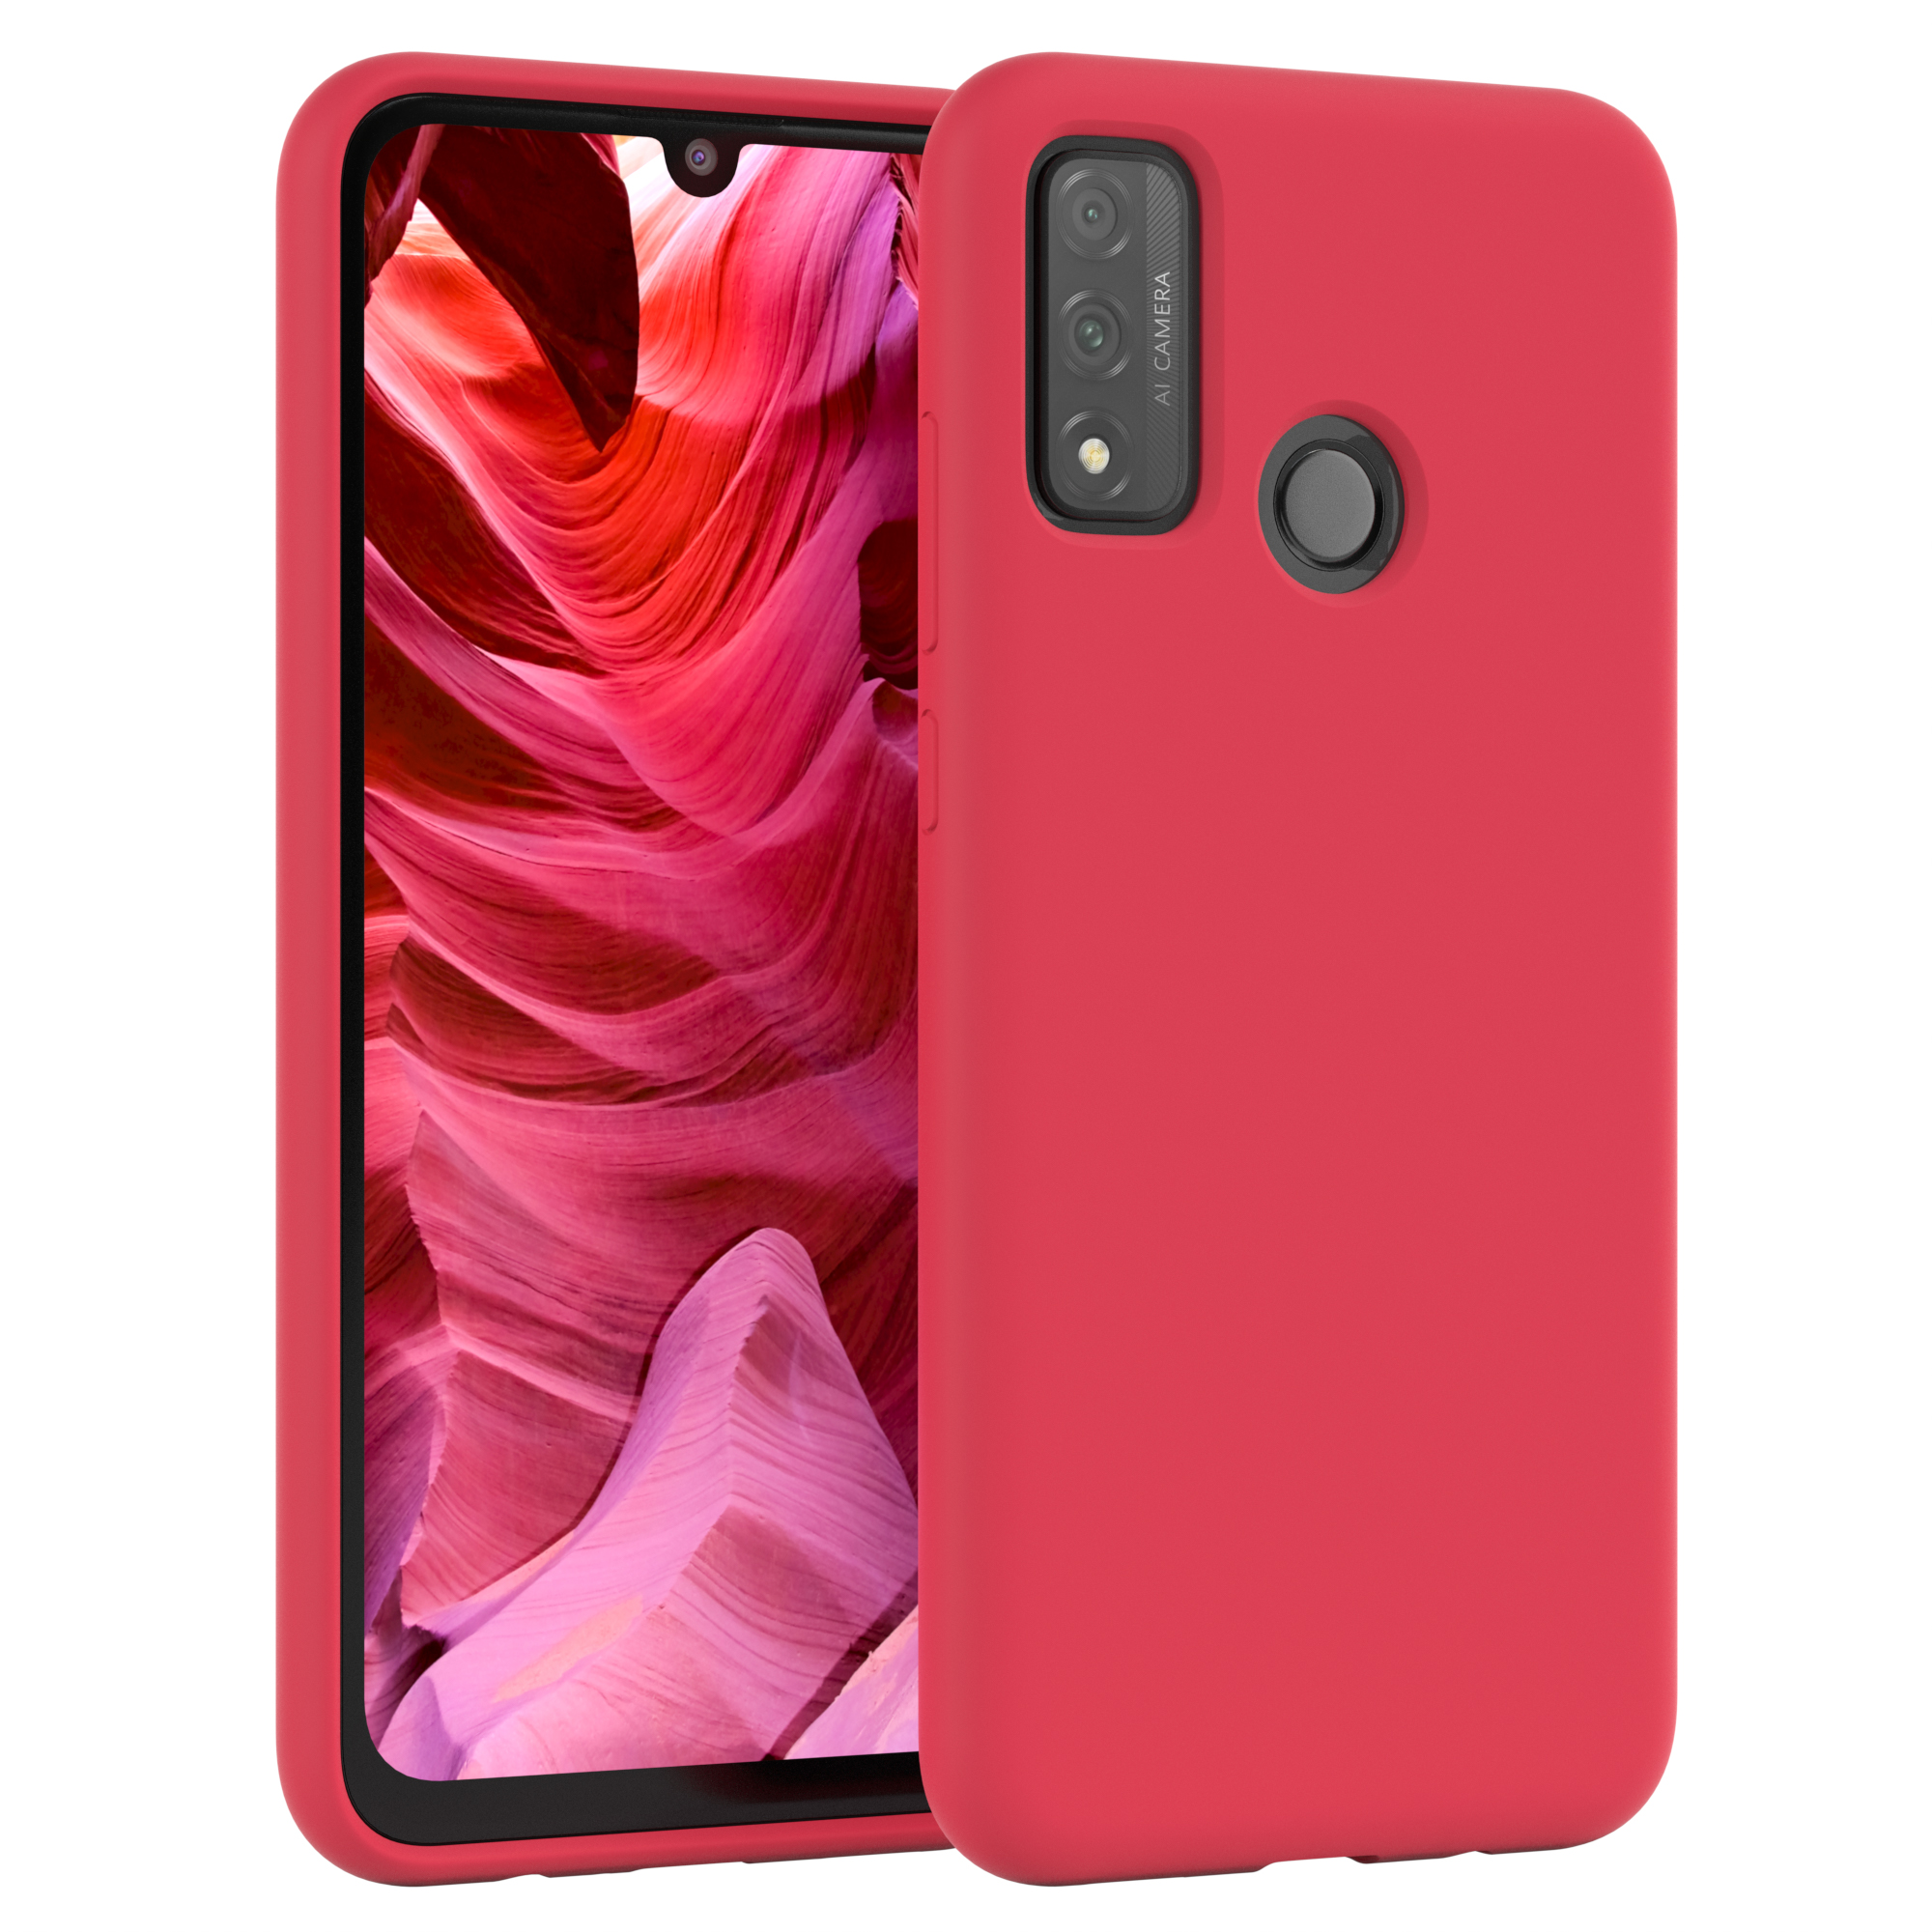 EAZY Premium CASE (2020), Huawei, / Backcover, Rot P Silikon Handycase, Beere Smart